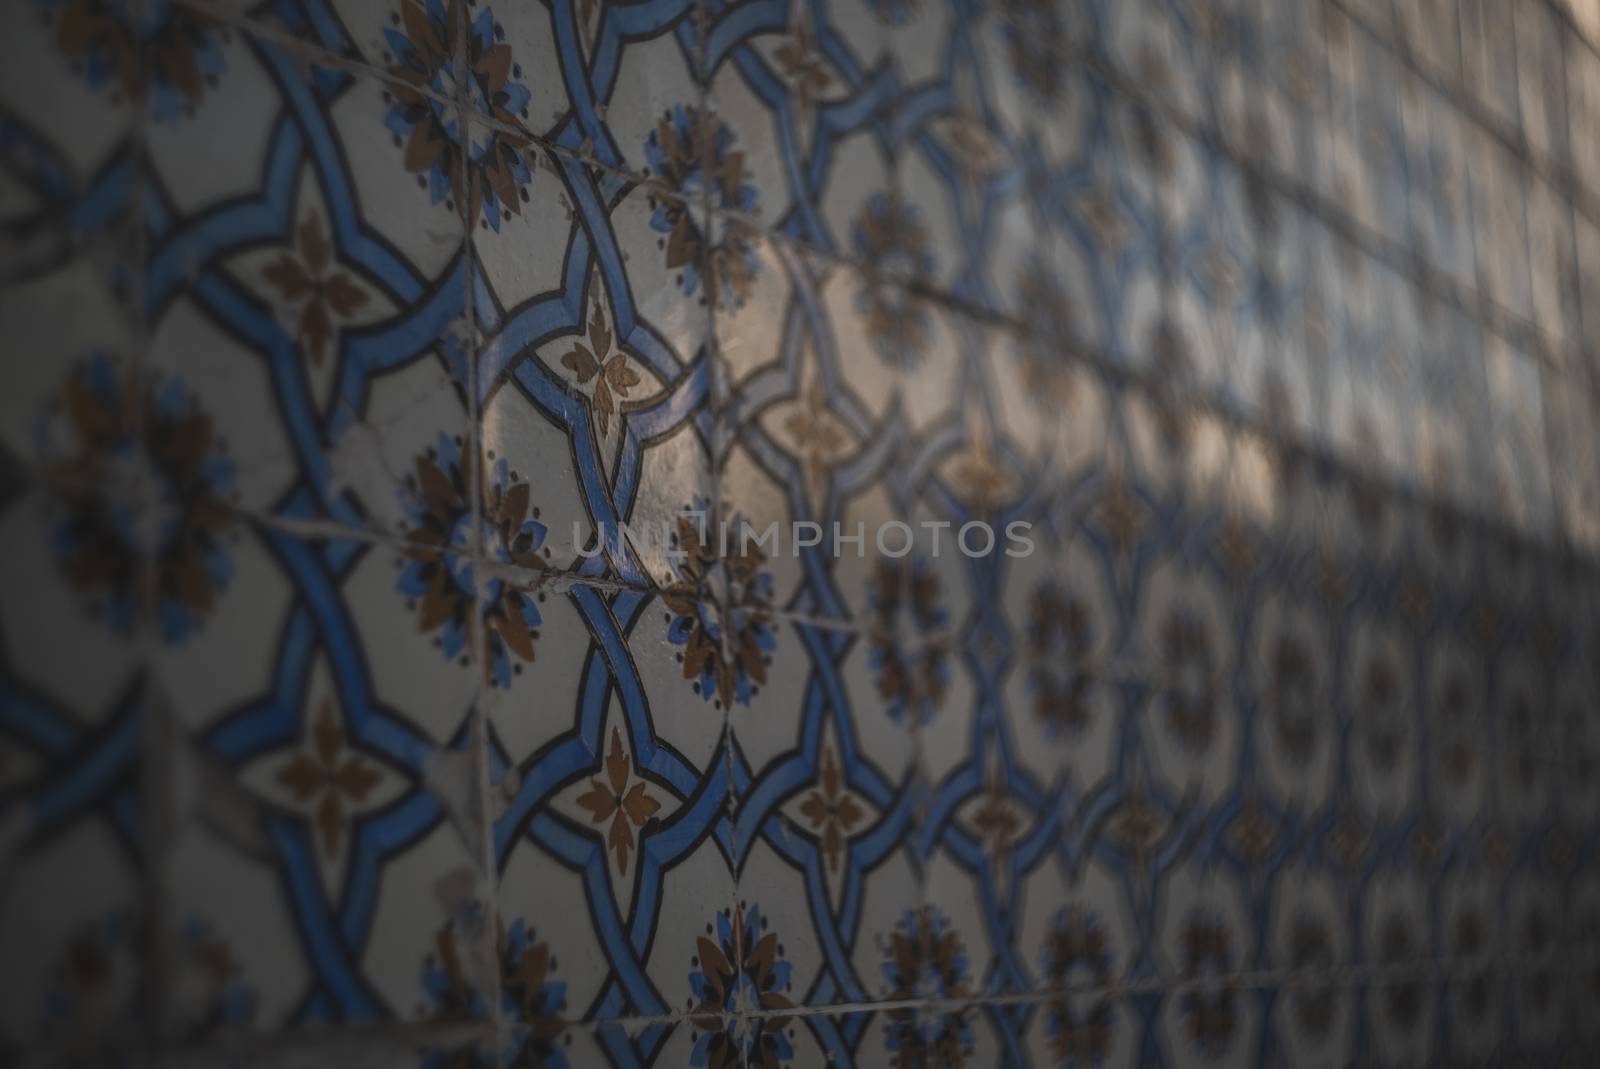 tiles in lisbon streets by sergio_amate